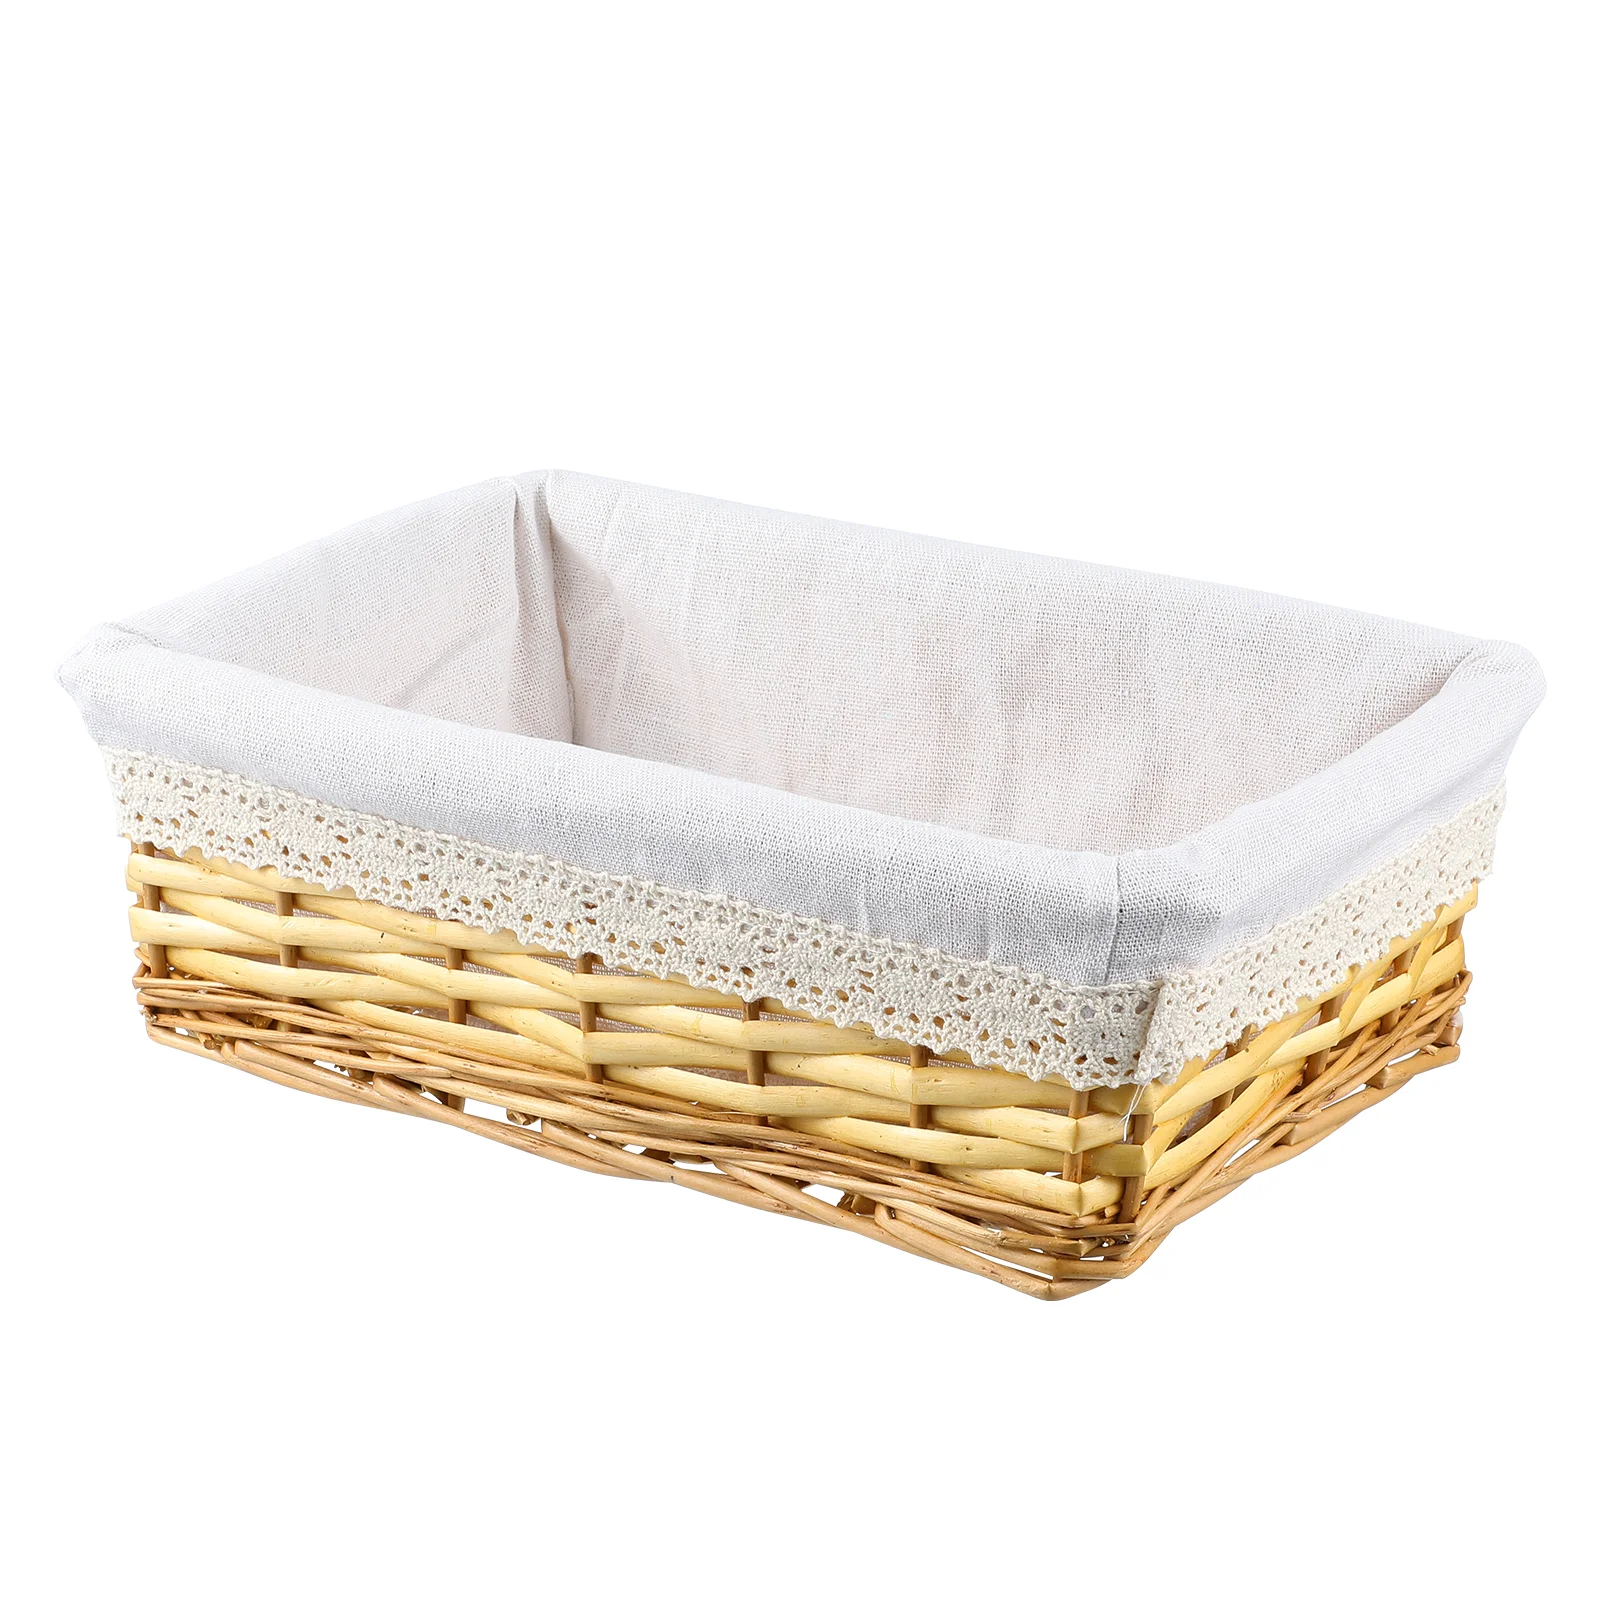 

Basket Storage Baskets Woven Wicker Tabletop Organizingsmall Dog Empty Home Holder Household Sundries Container Gifts